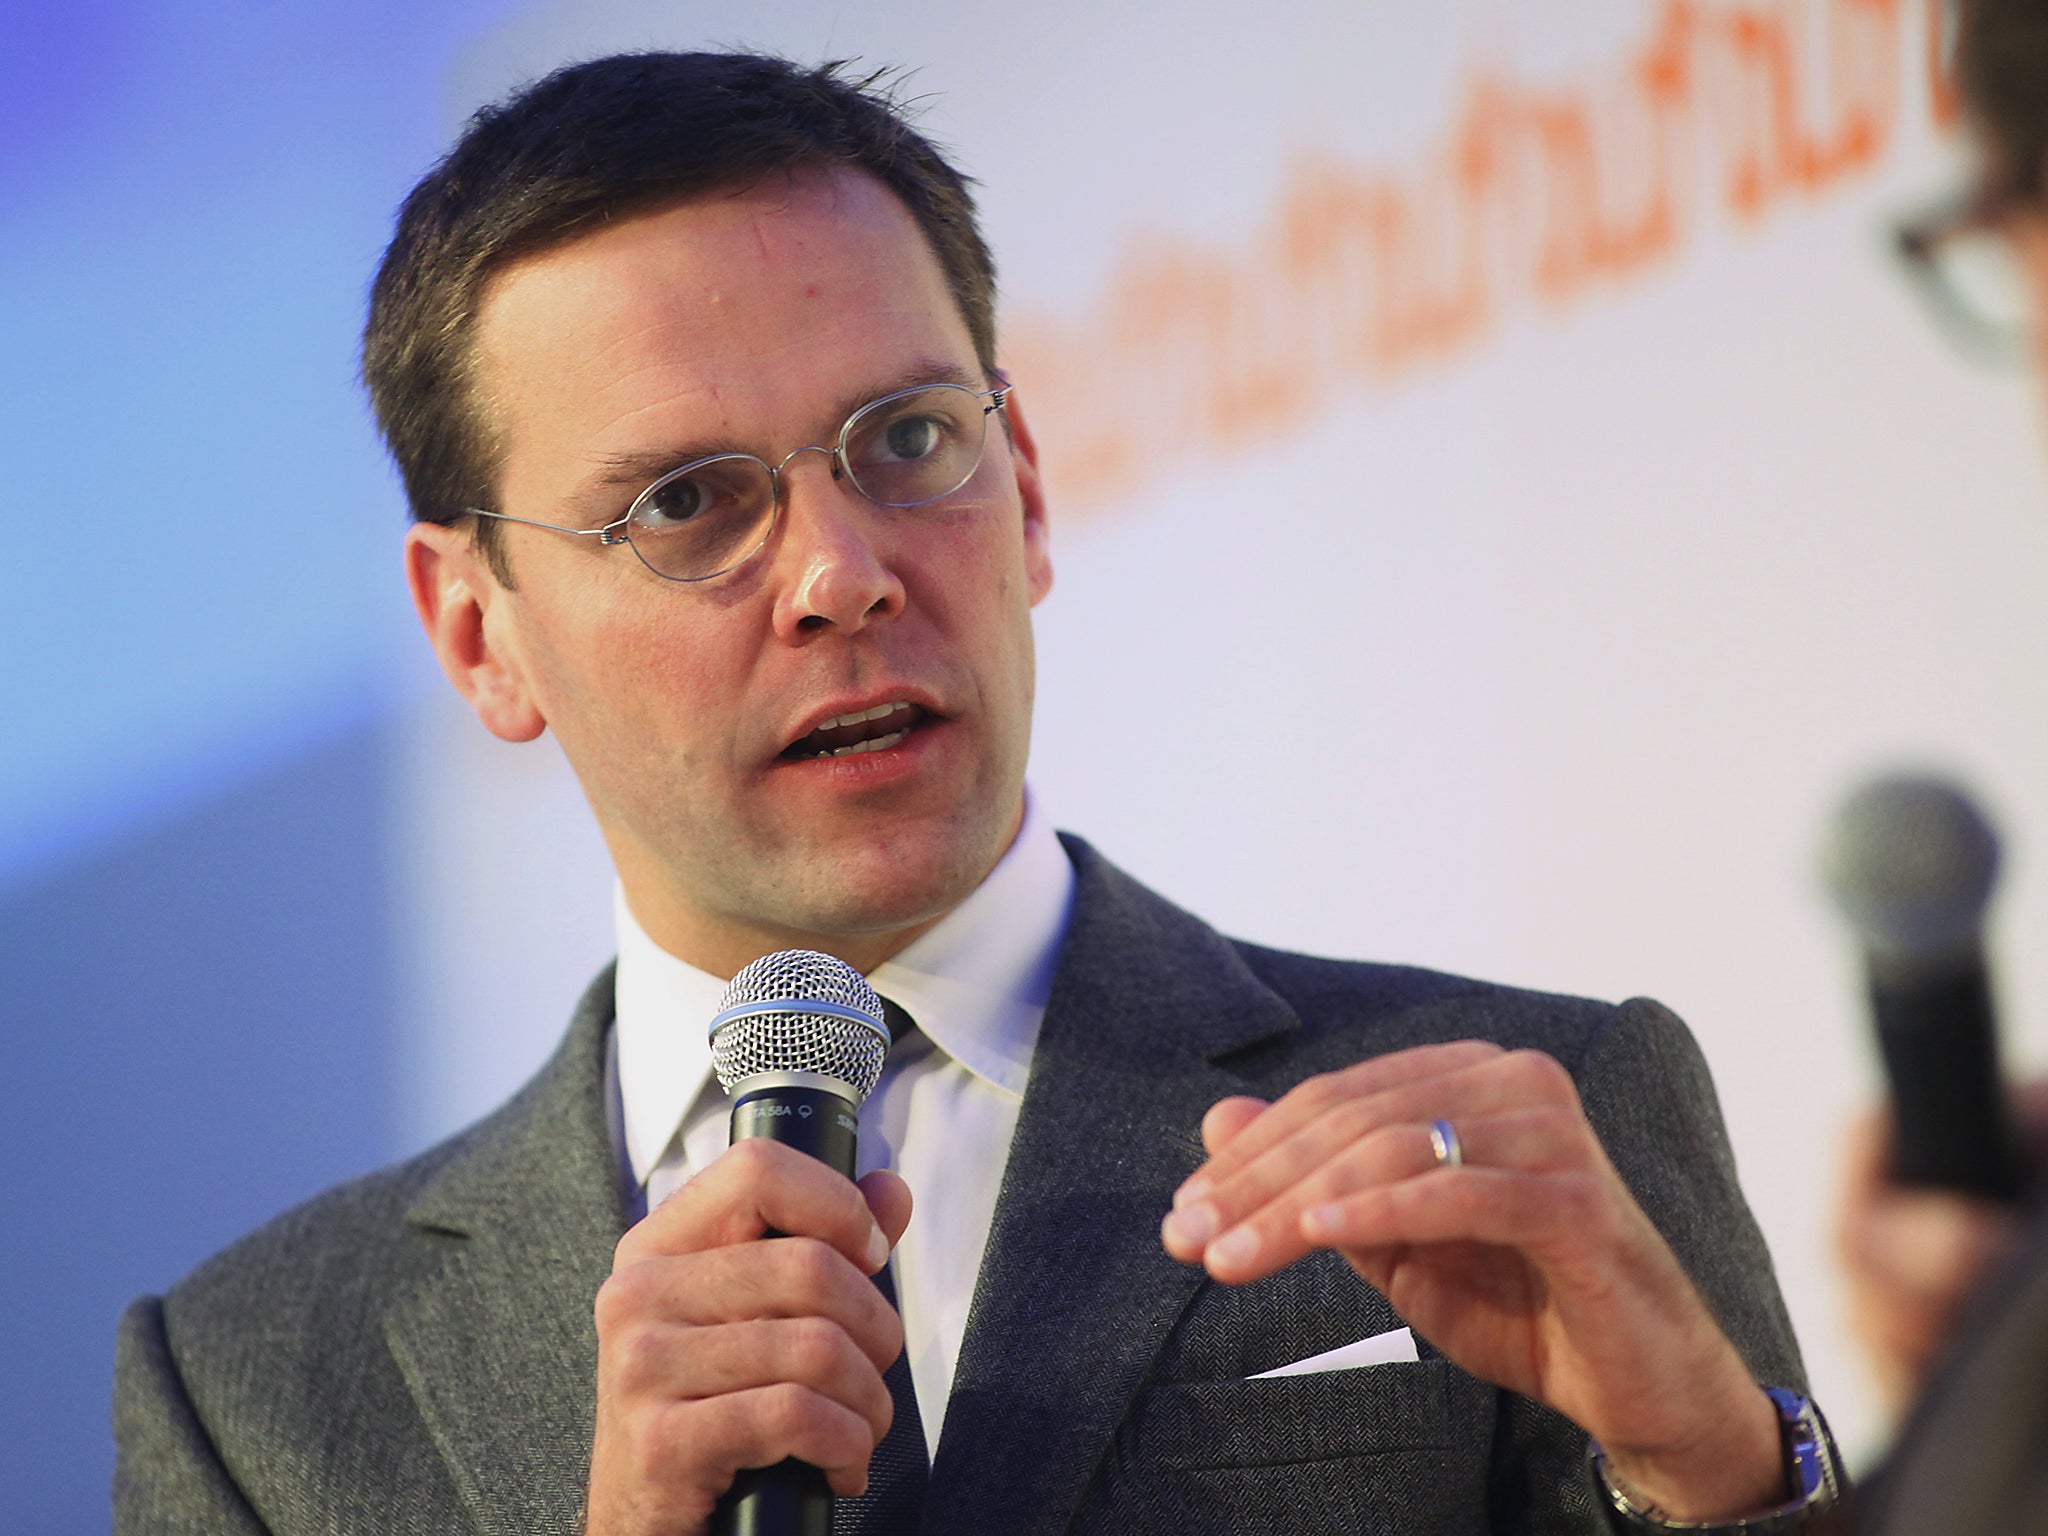 Nearly half of independent shareholders voted to oppose James Murdoch's reappointment